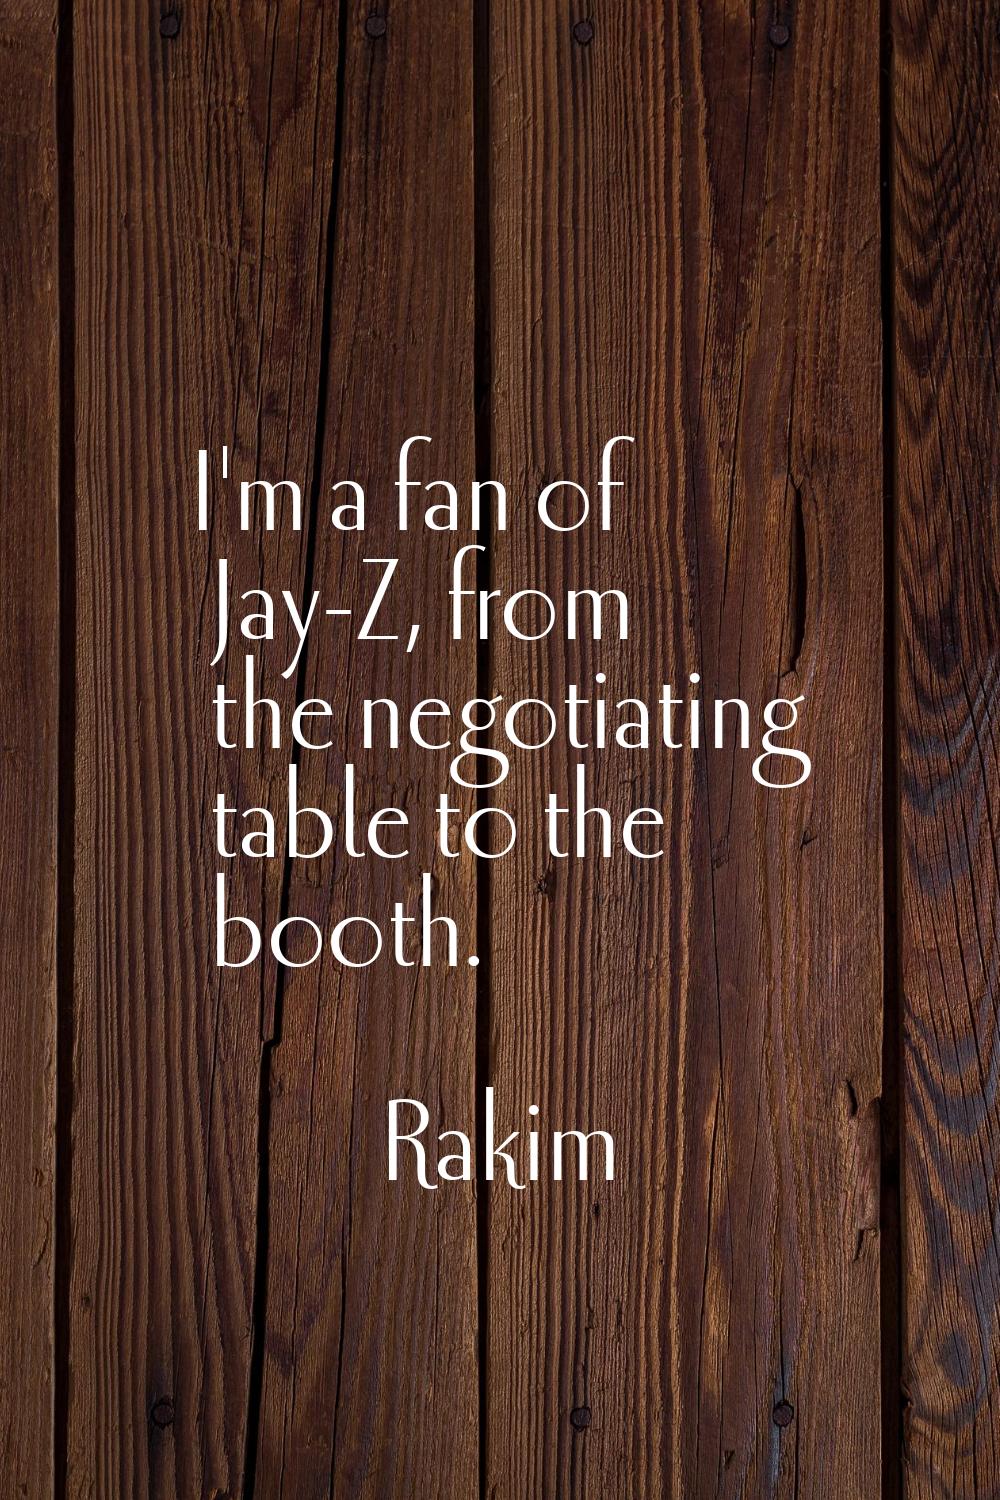 I'm a fan of Jay-Z, from the negotiating table to the booth.